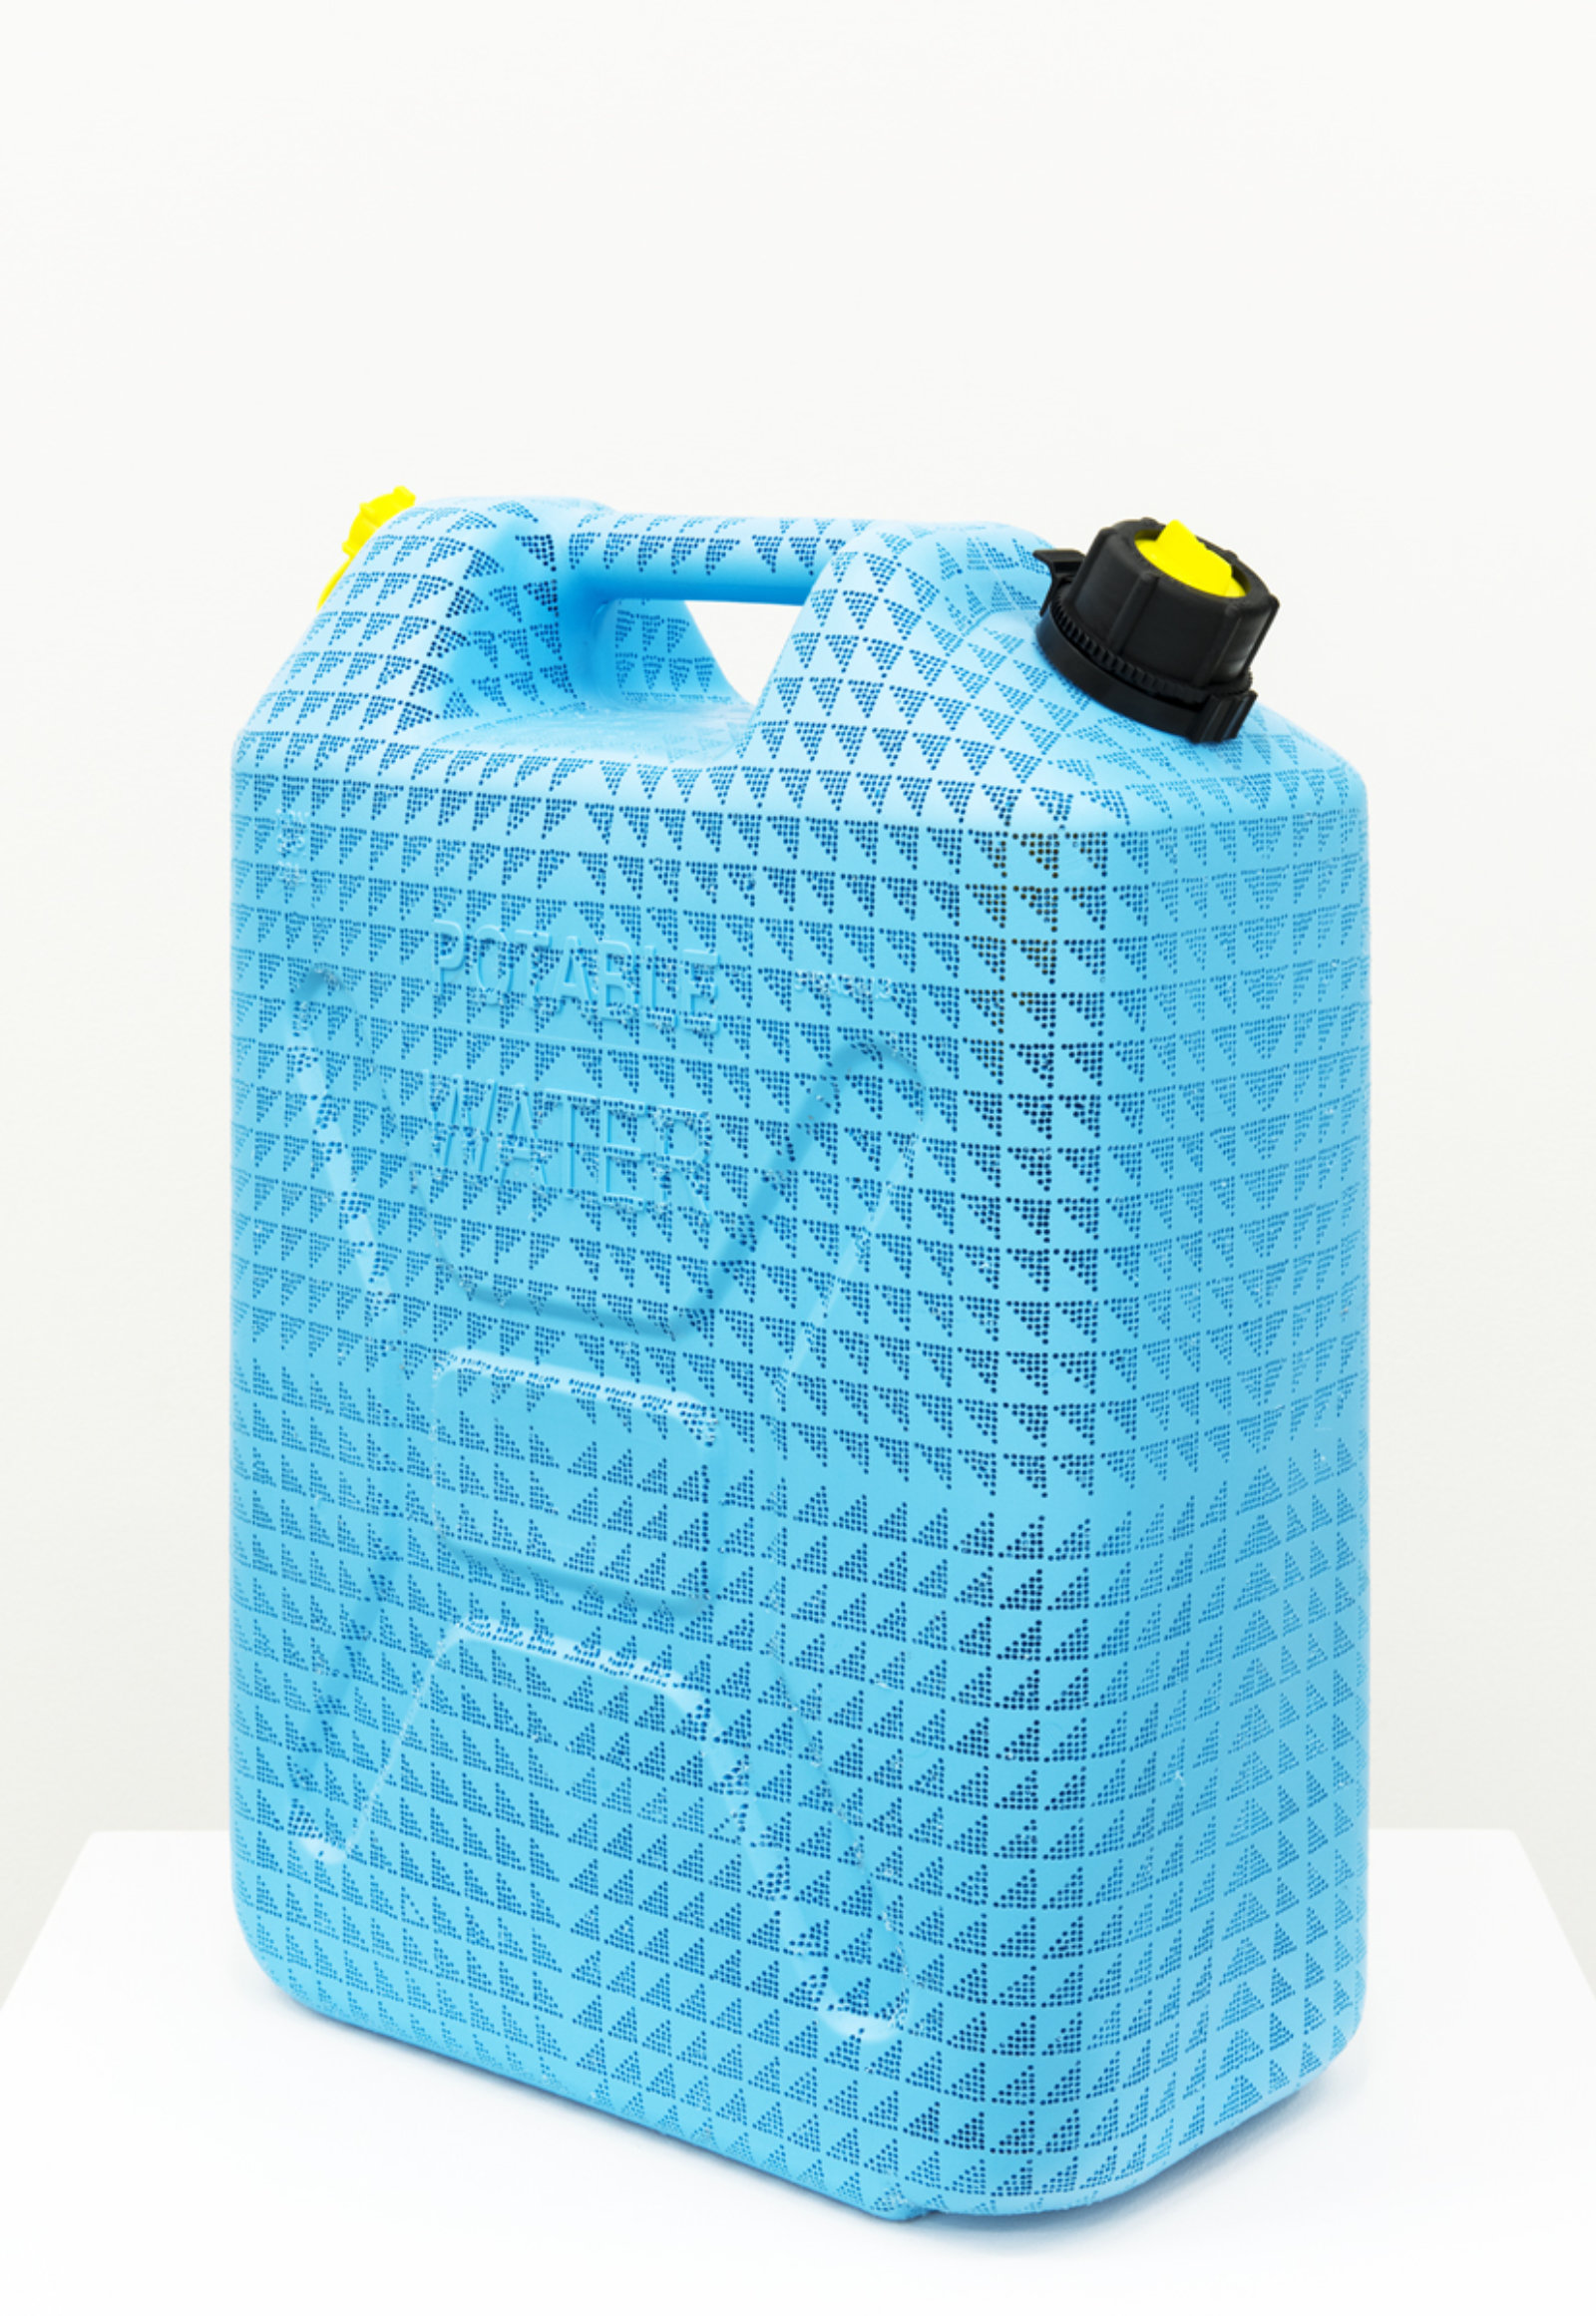 Brian Jungen, Triangle Repeater, 2013, carved gallon water jug, 18 x 13 x 7 in. (46 x 33 x 18 cm)